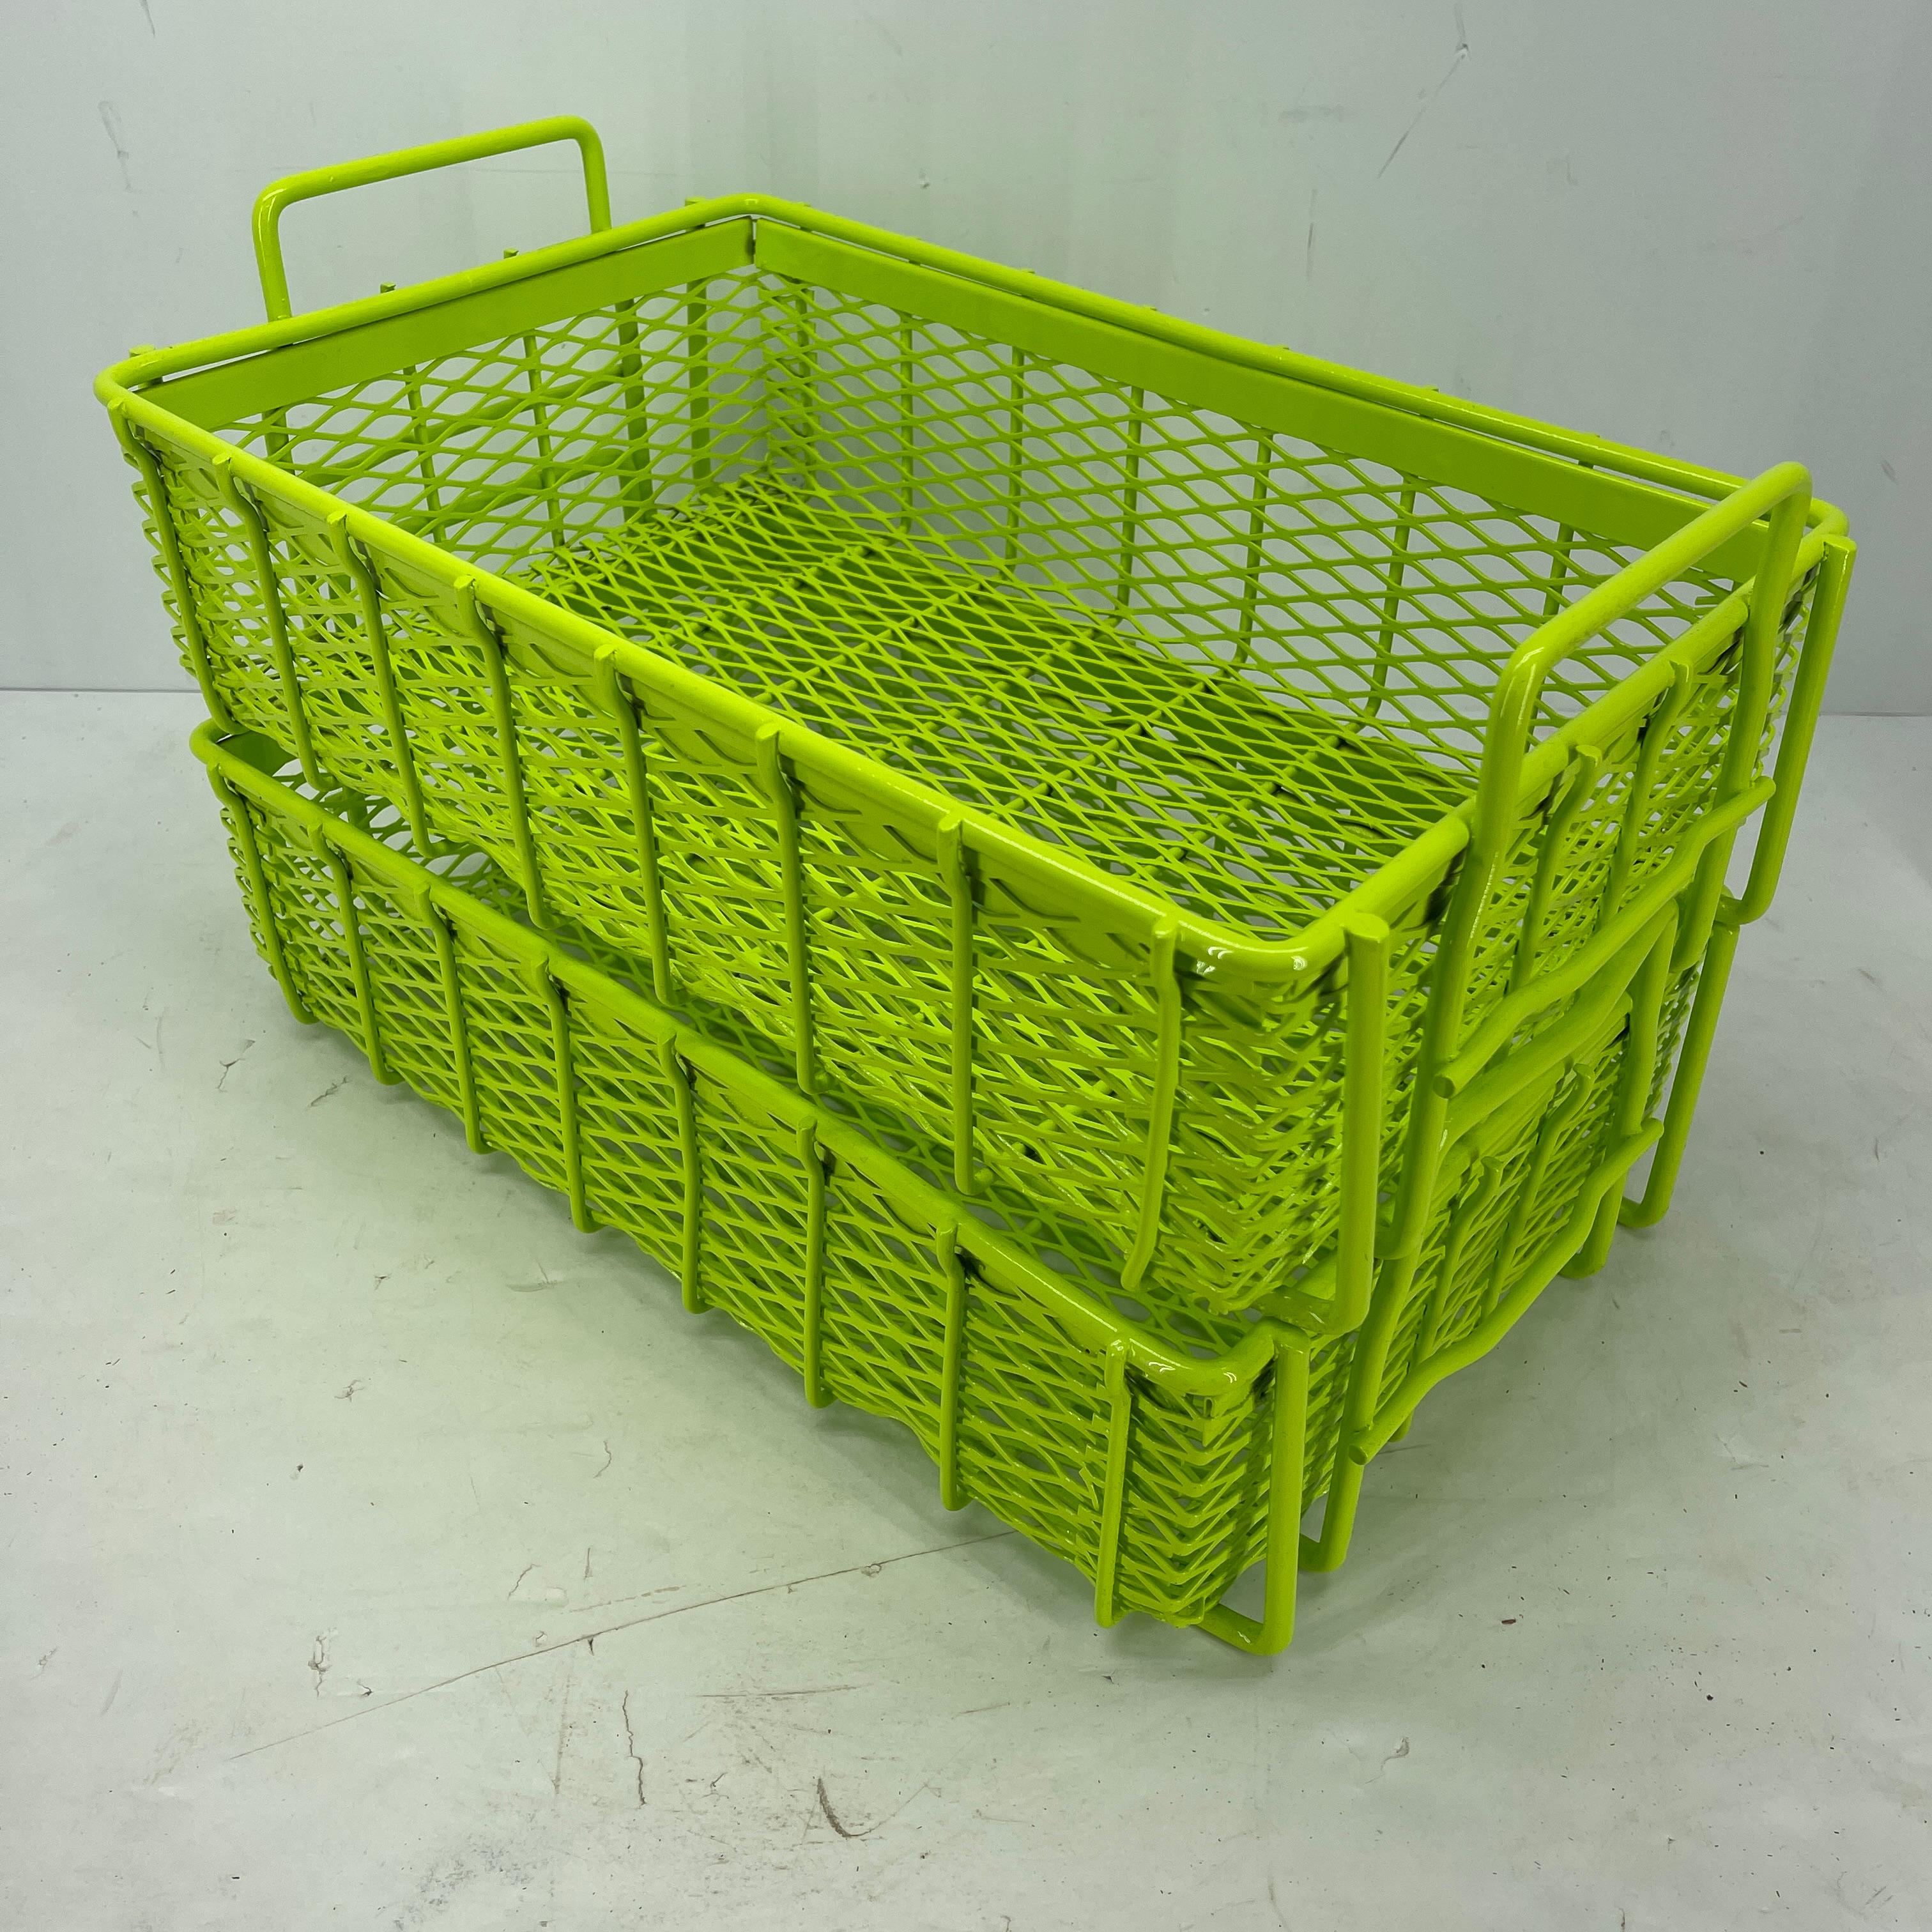 Powder-Coated Industrial Era Metal Storage Bins, Powder Coated Bright Chartreuse For Sale